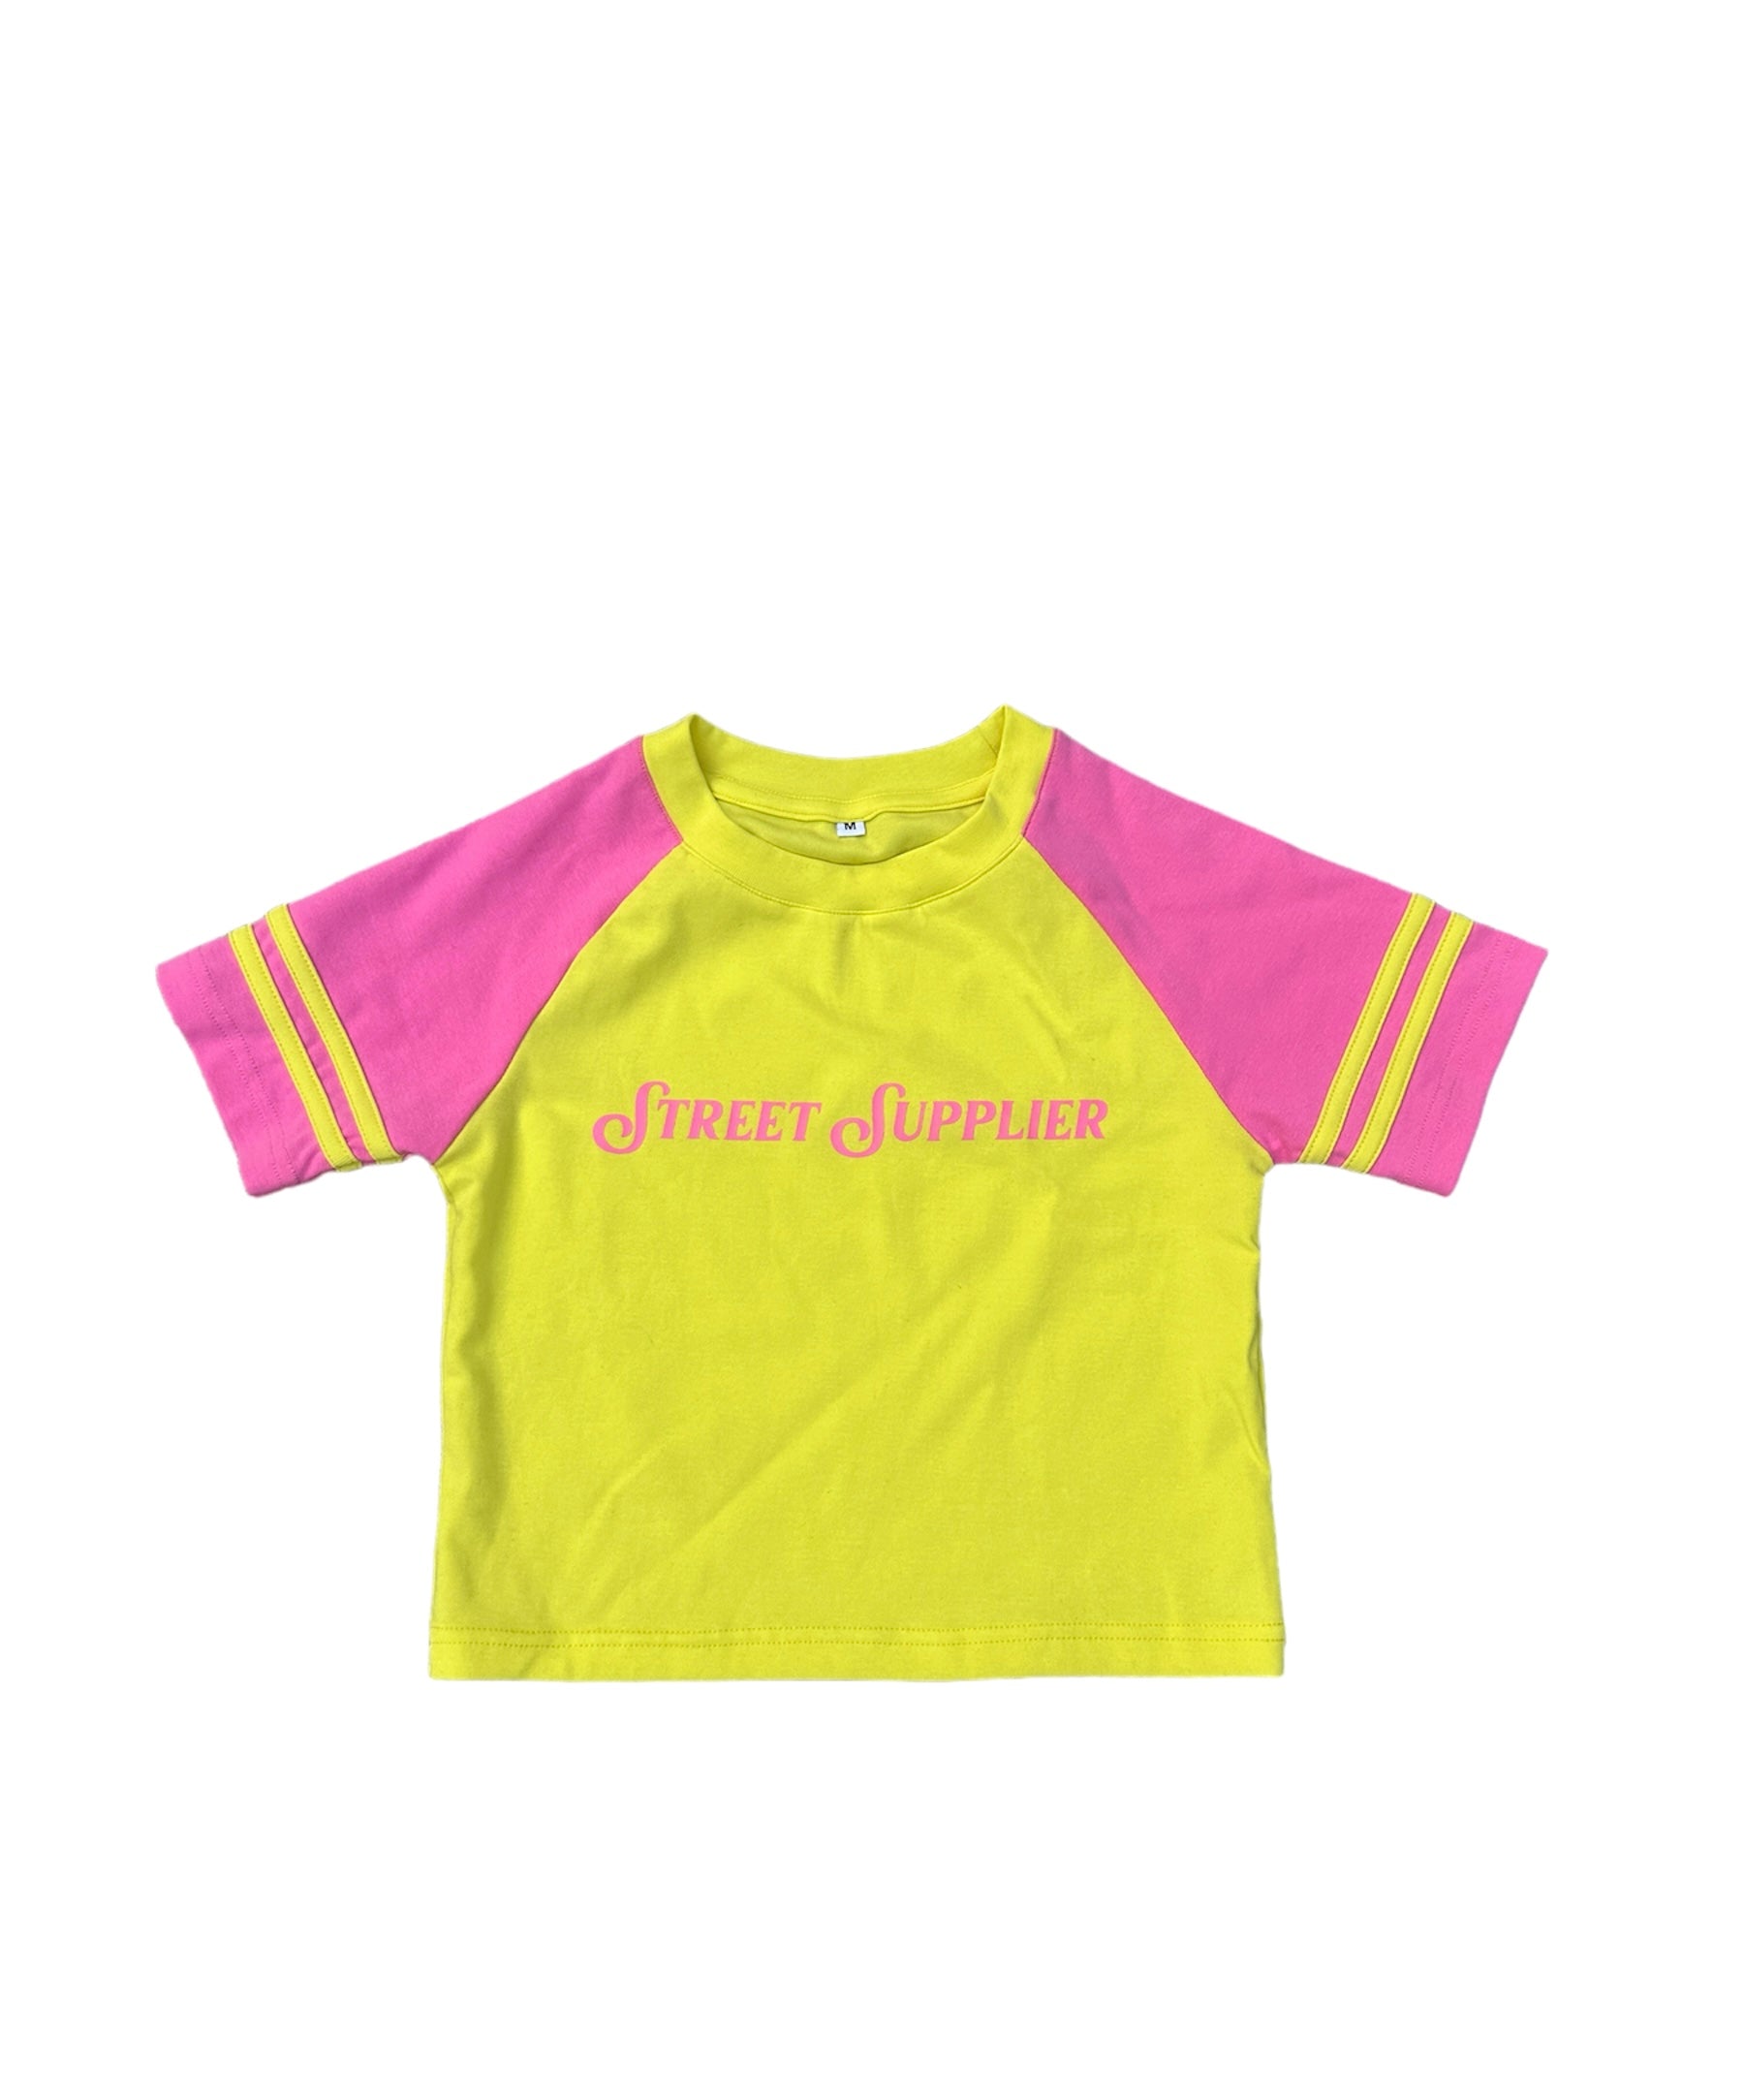 Vice city cropped tee